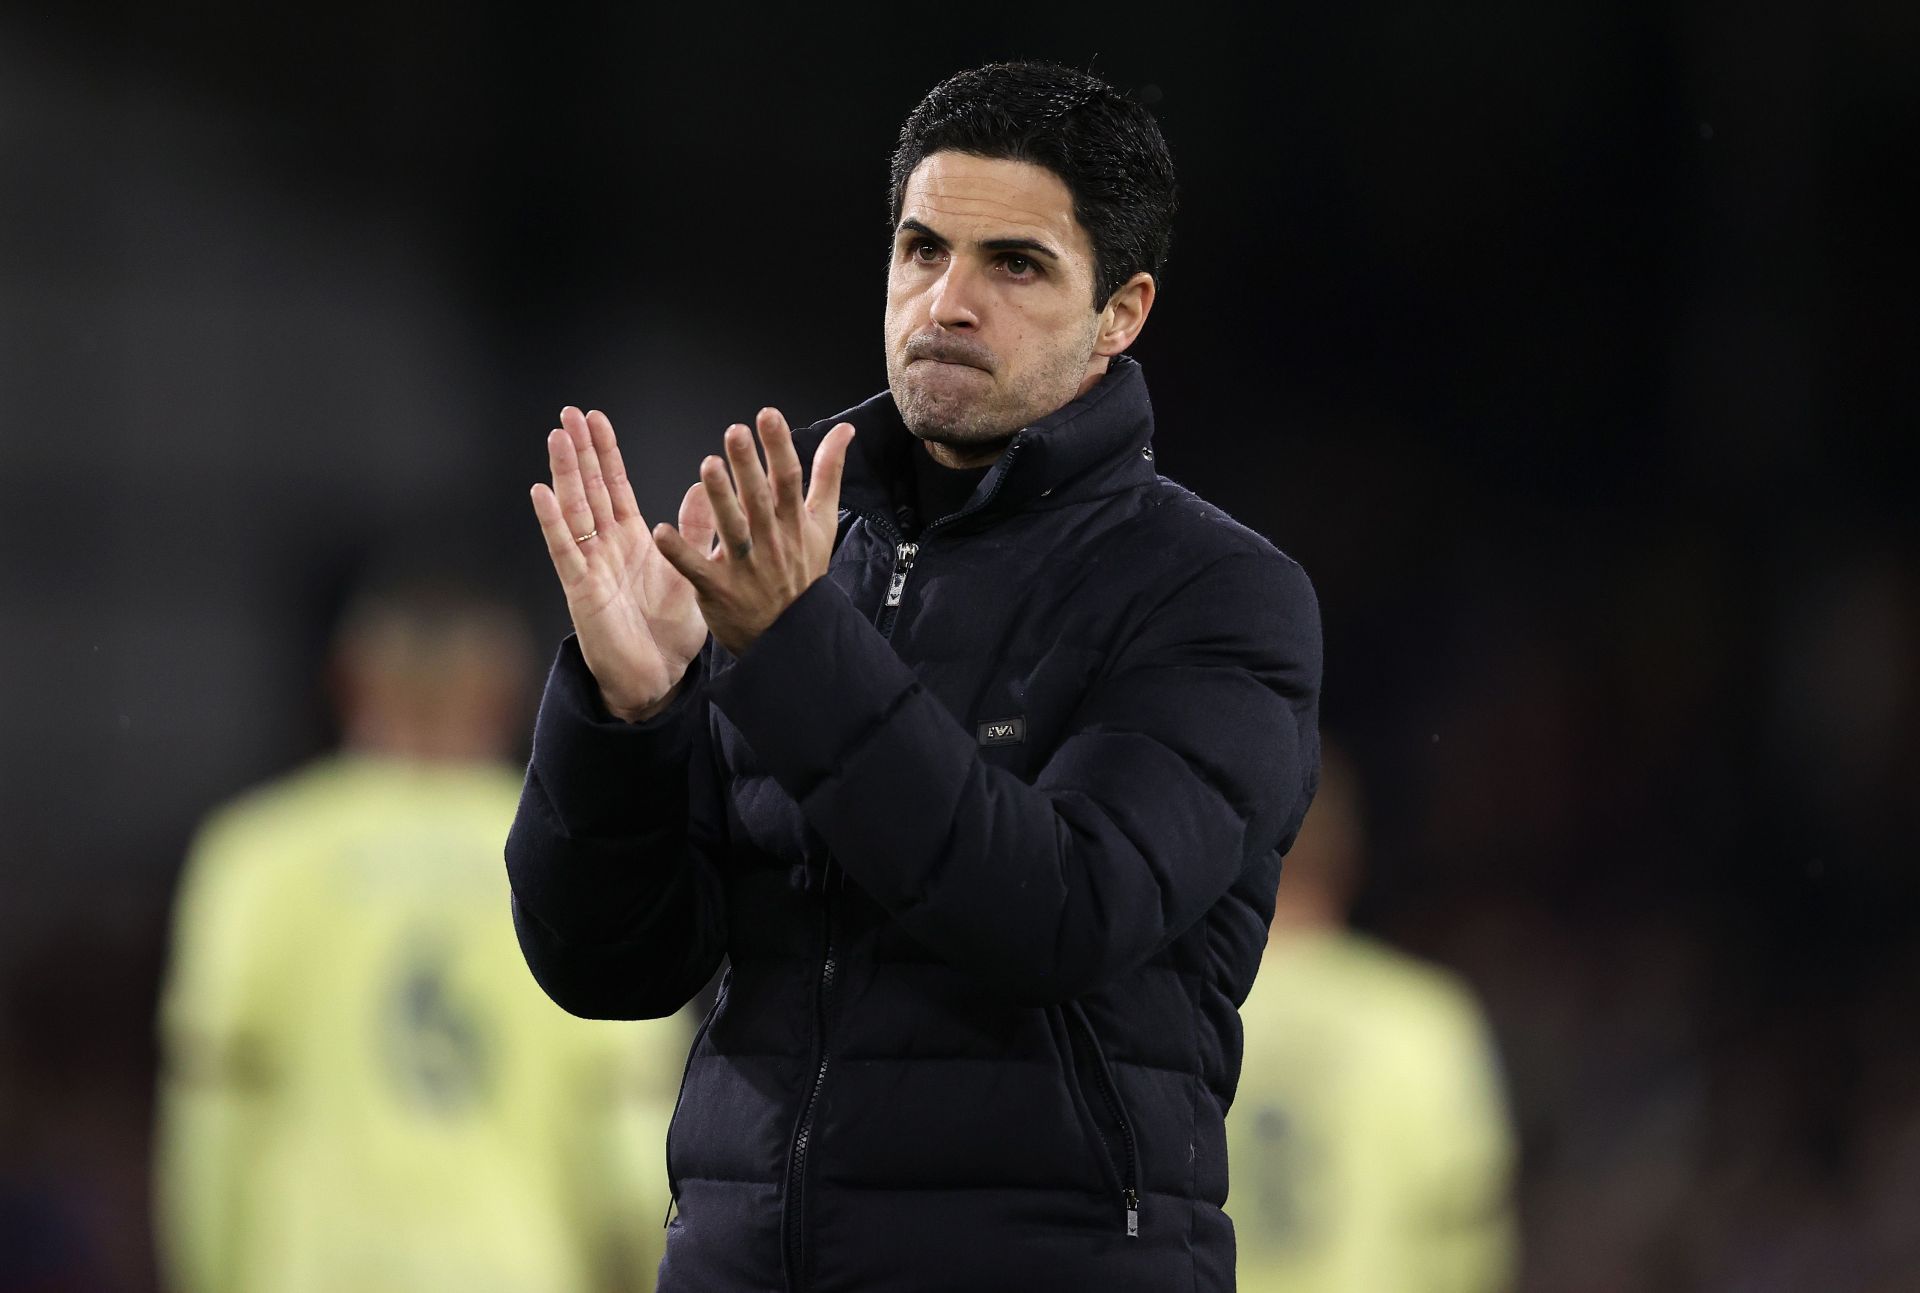 Arsenal manager Mikel Arteta is preparing for busy days ahead